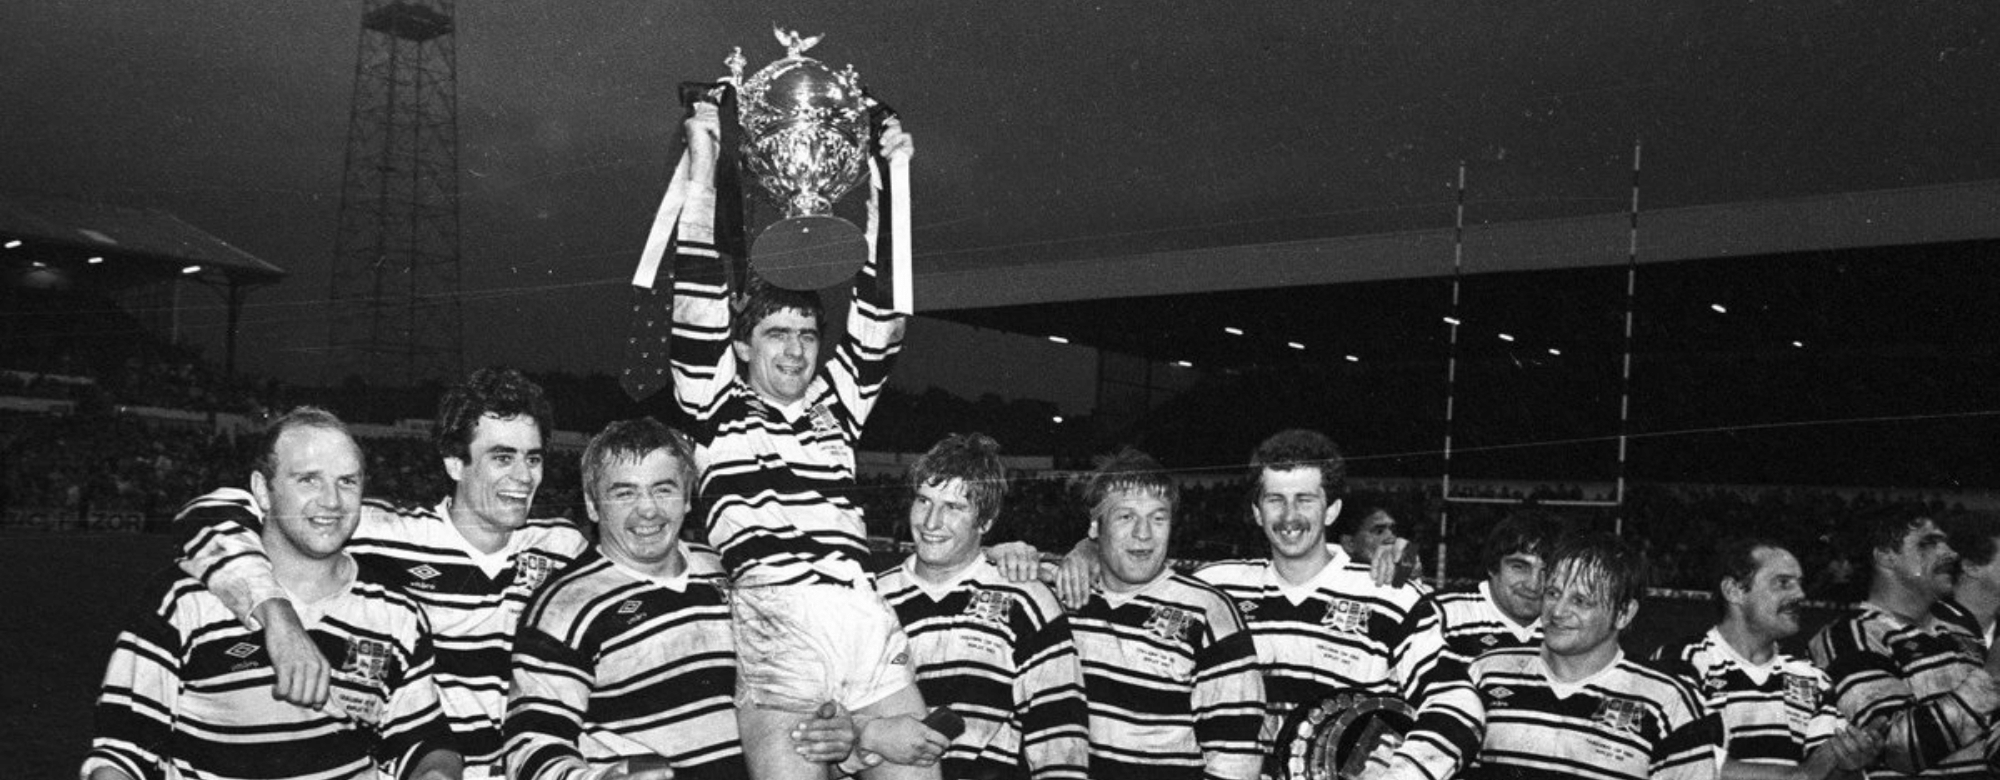 Remembering The 1982 Challenge Cup Final Replay